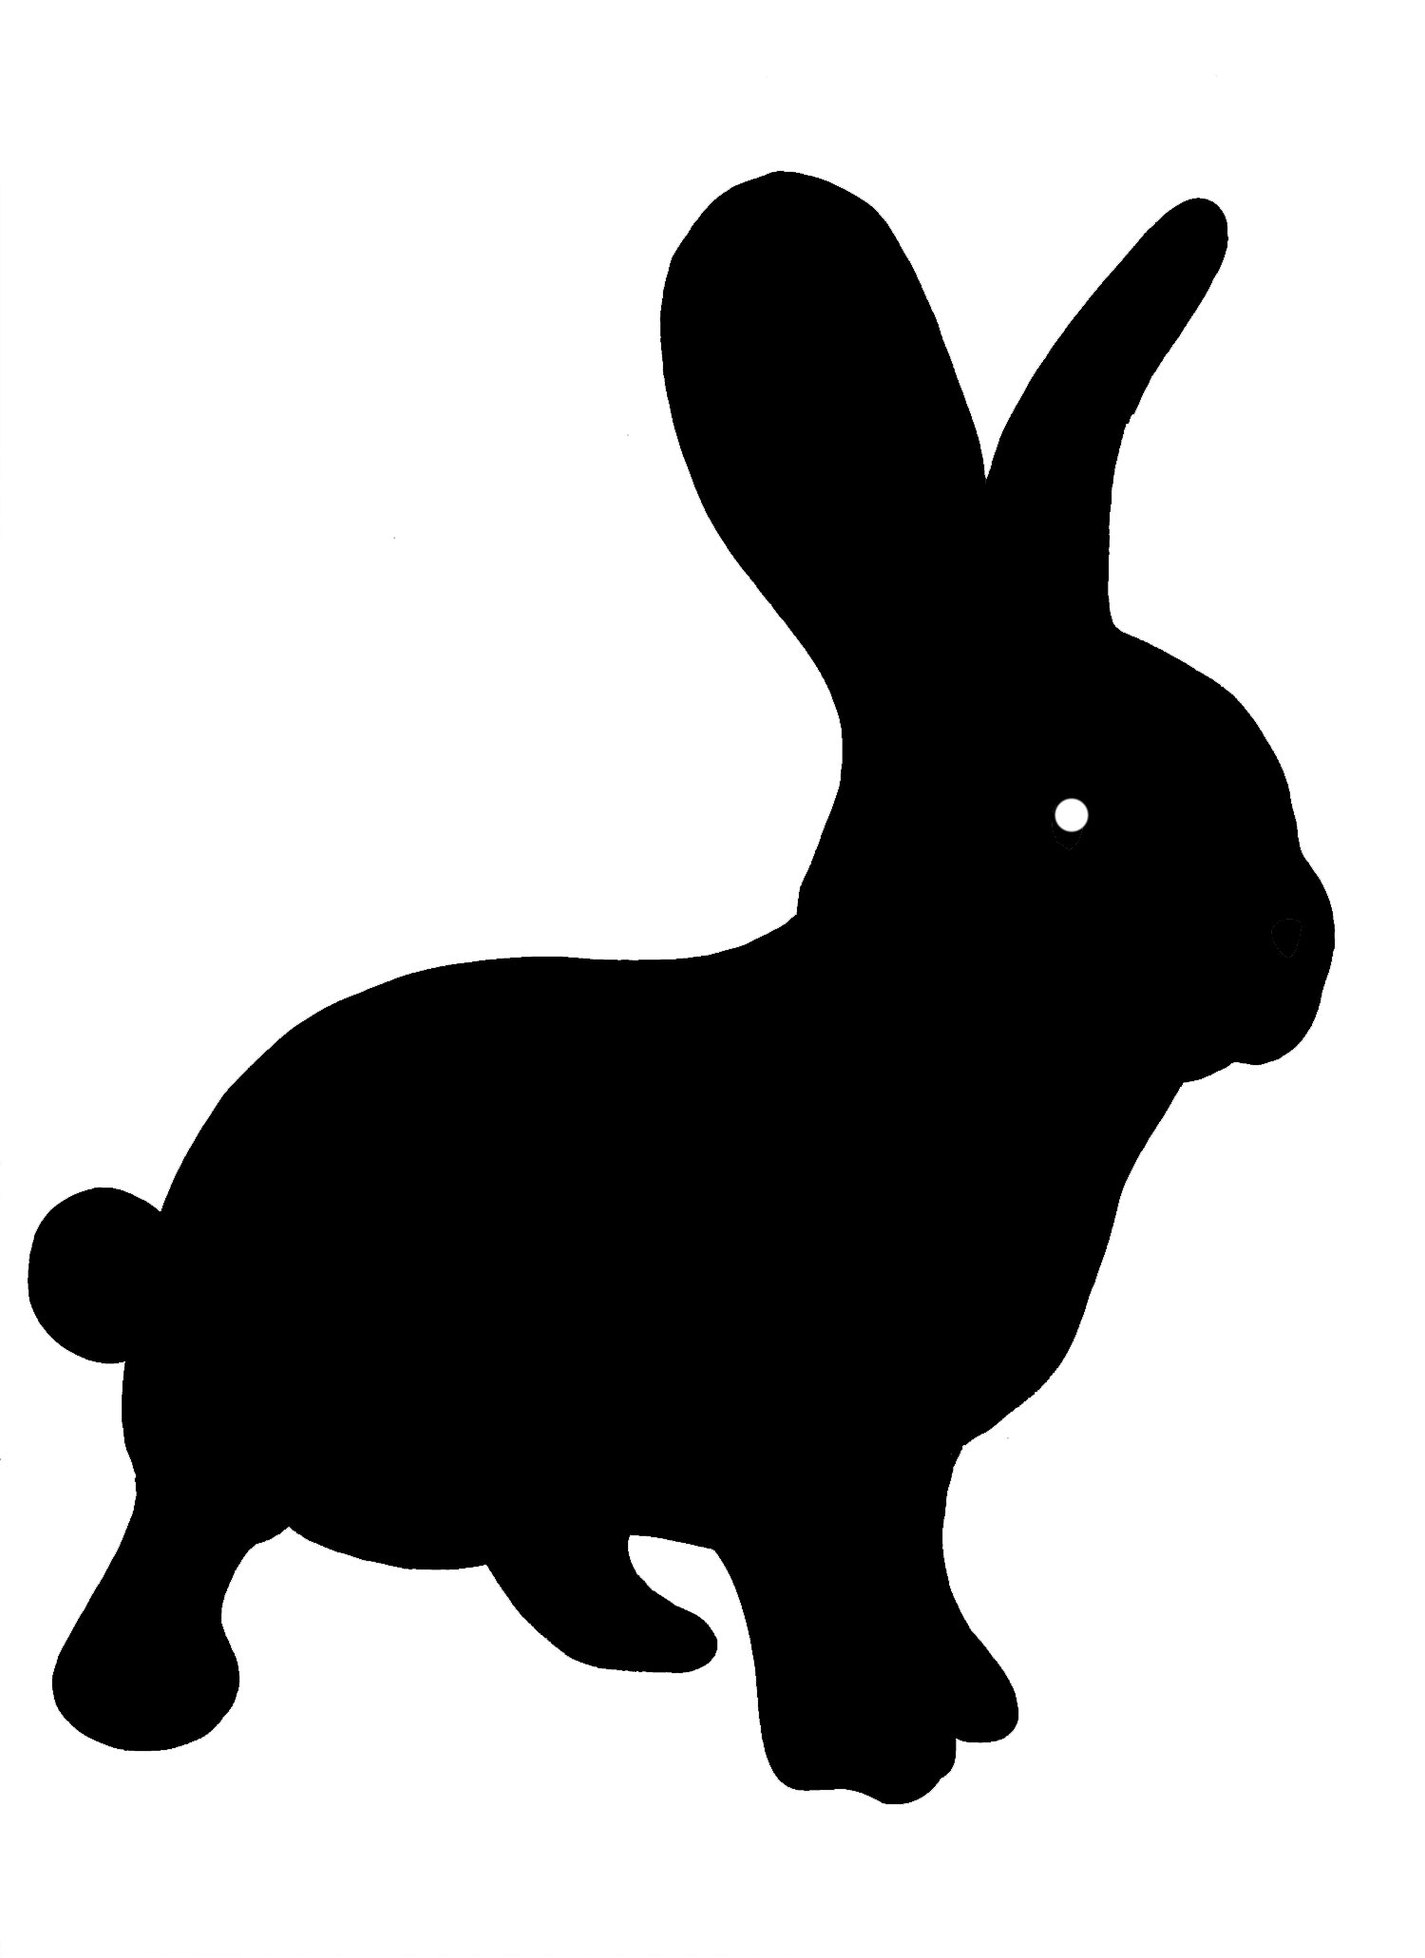 Bunny Rabbit Silhouette Clipart - Free to use Clip Art Resource